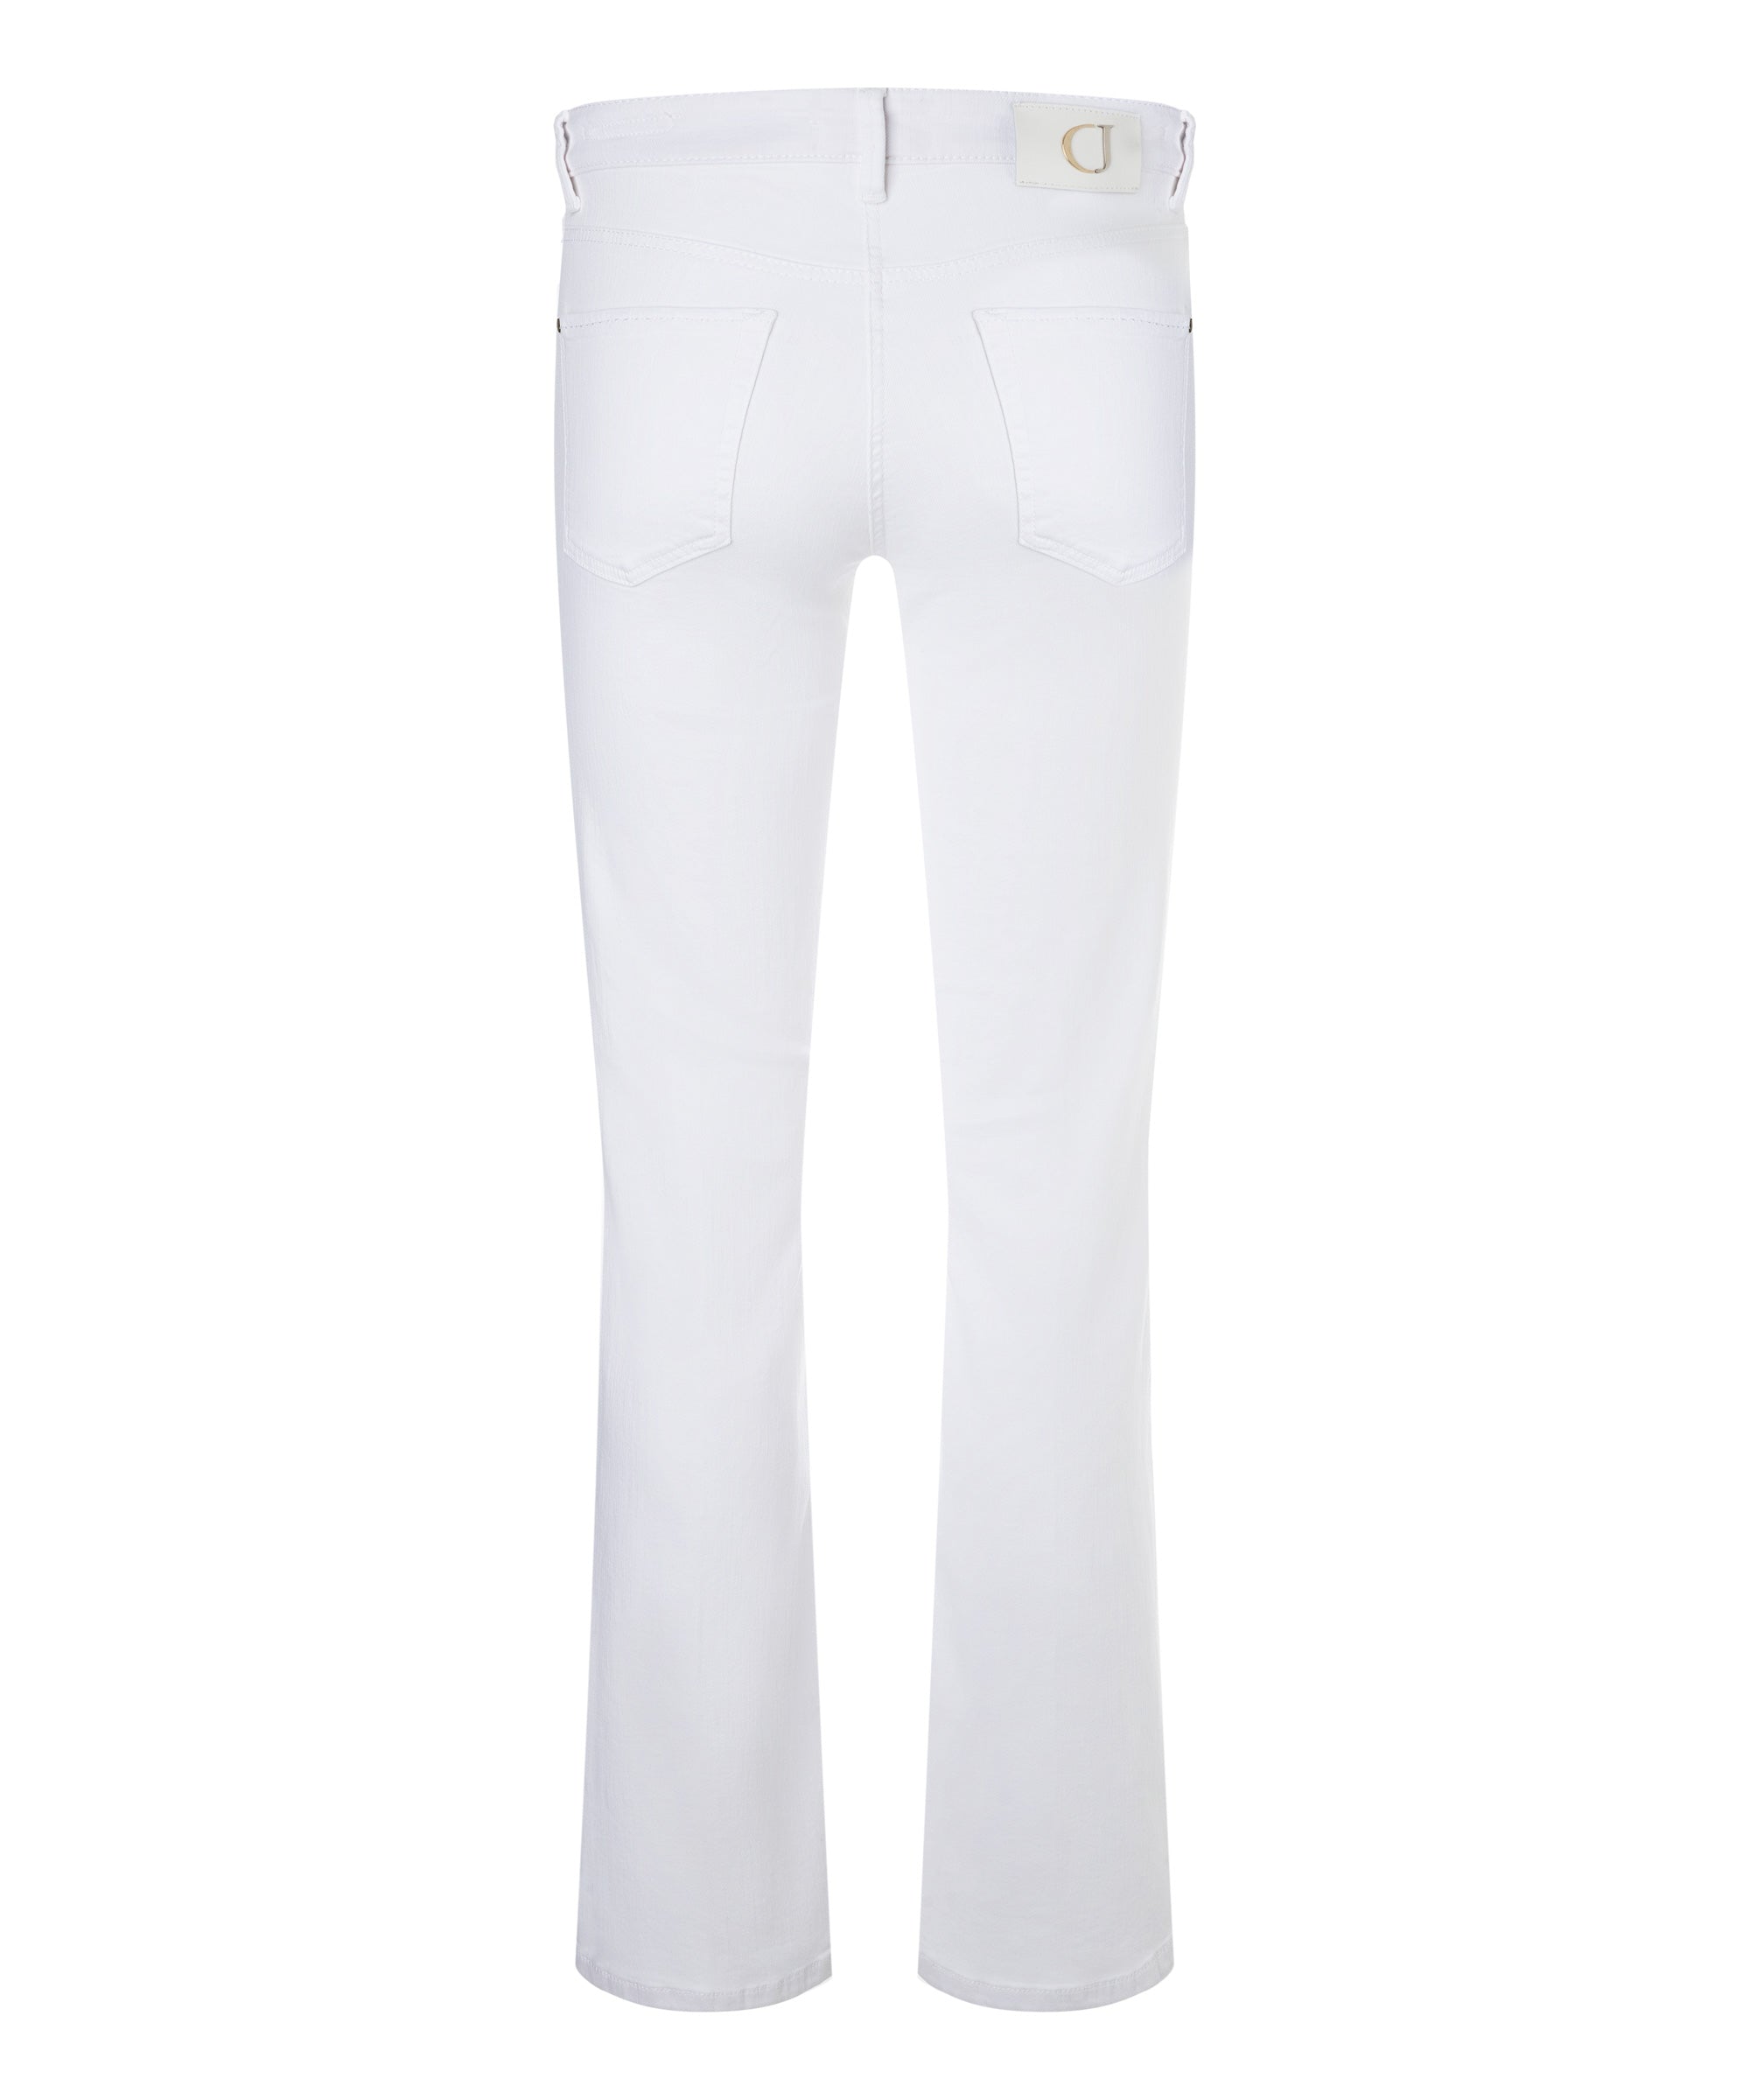 Paris Flared Pant By Cambio